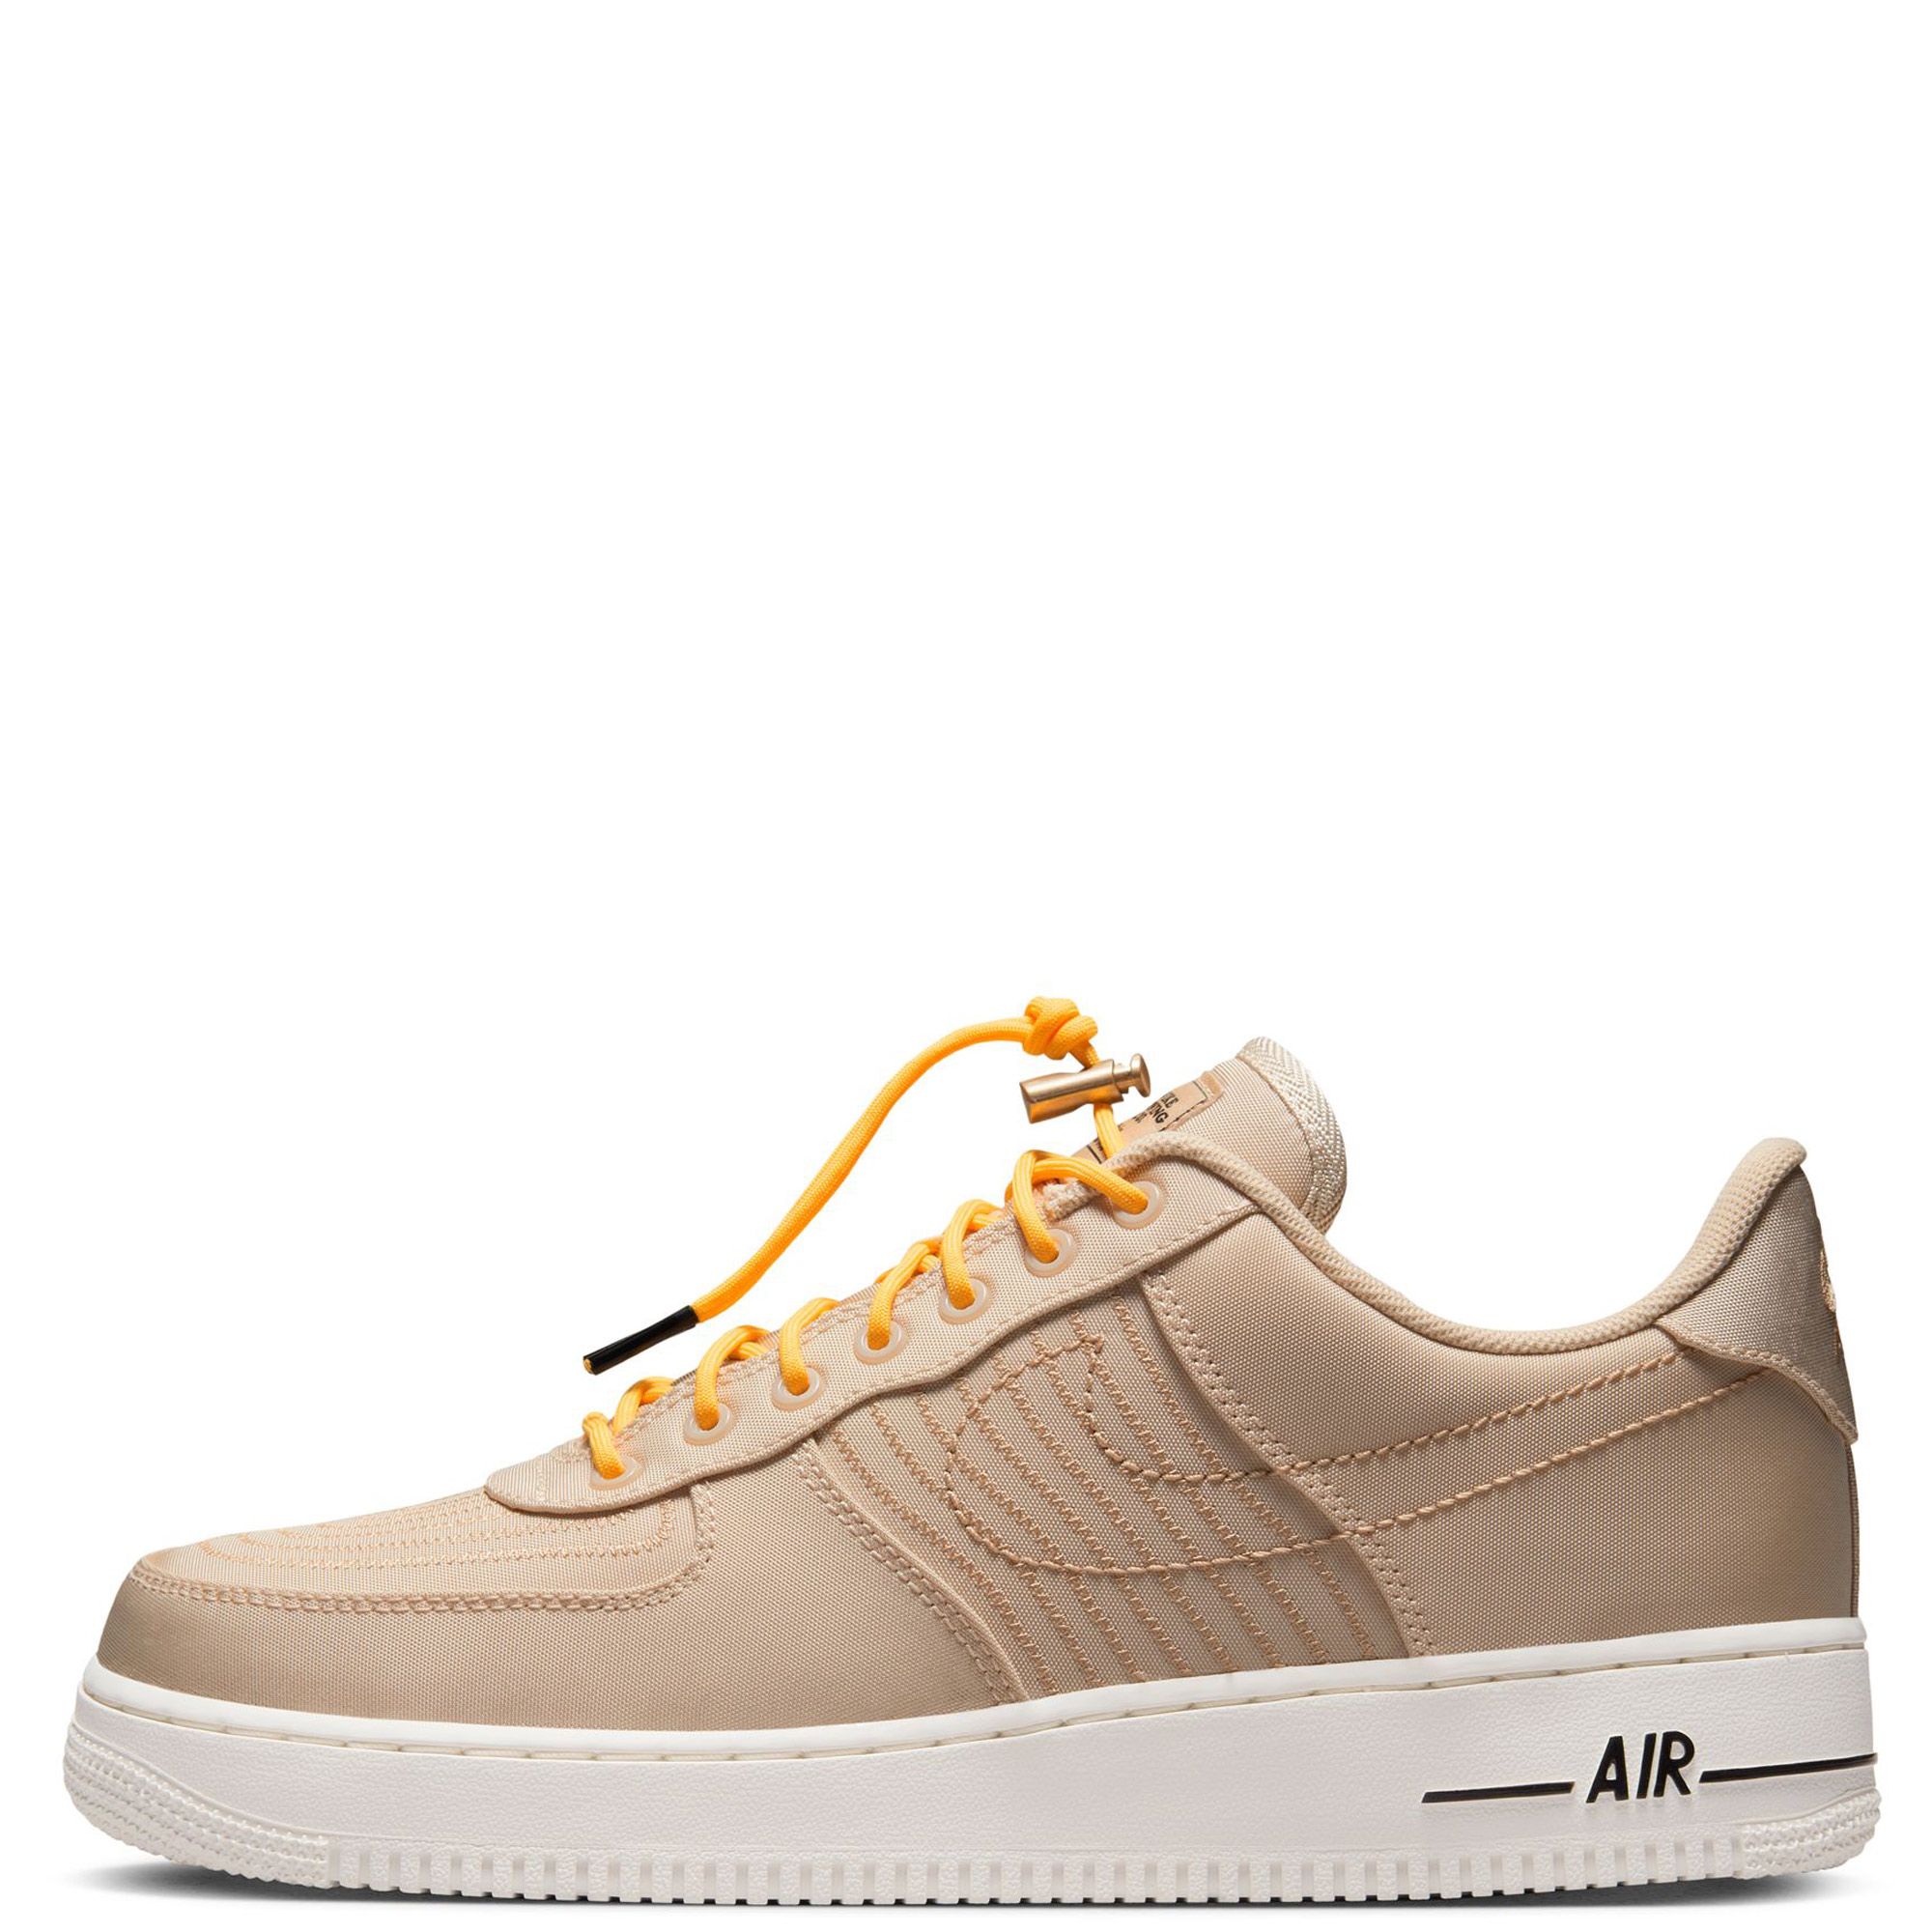 Nike Sportswear AIR FORCE 1 07 - Trainers - sail/night maroon/med  brown/white 